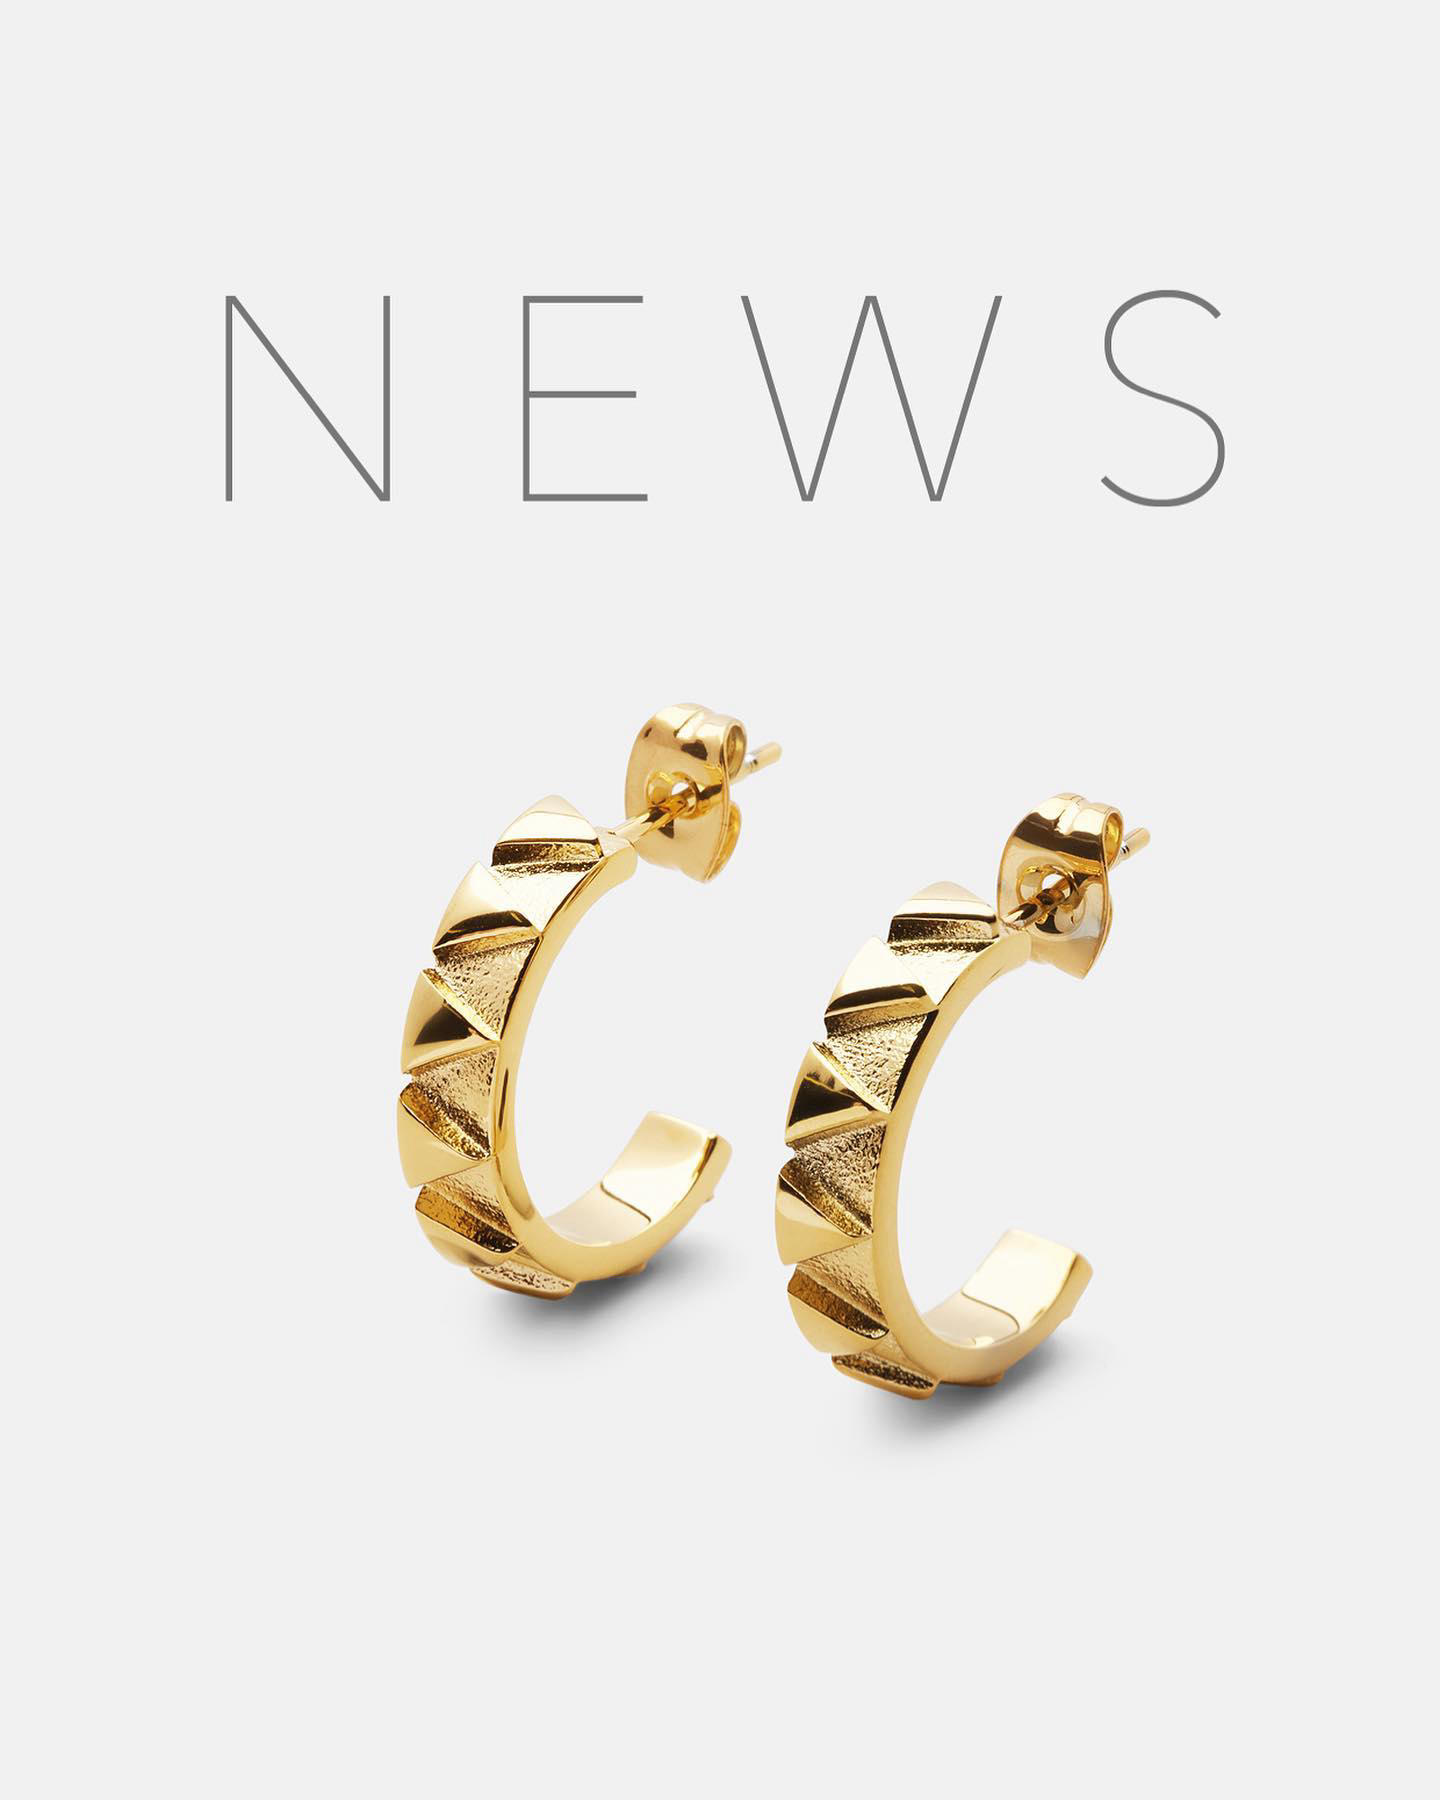 New earrings in collab with our equestrian friends at #getthegallop